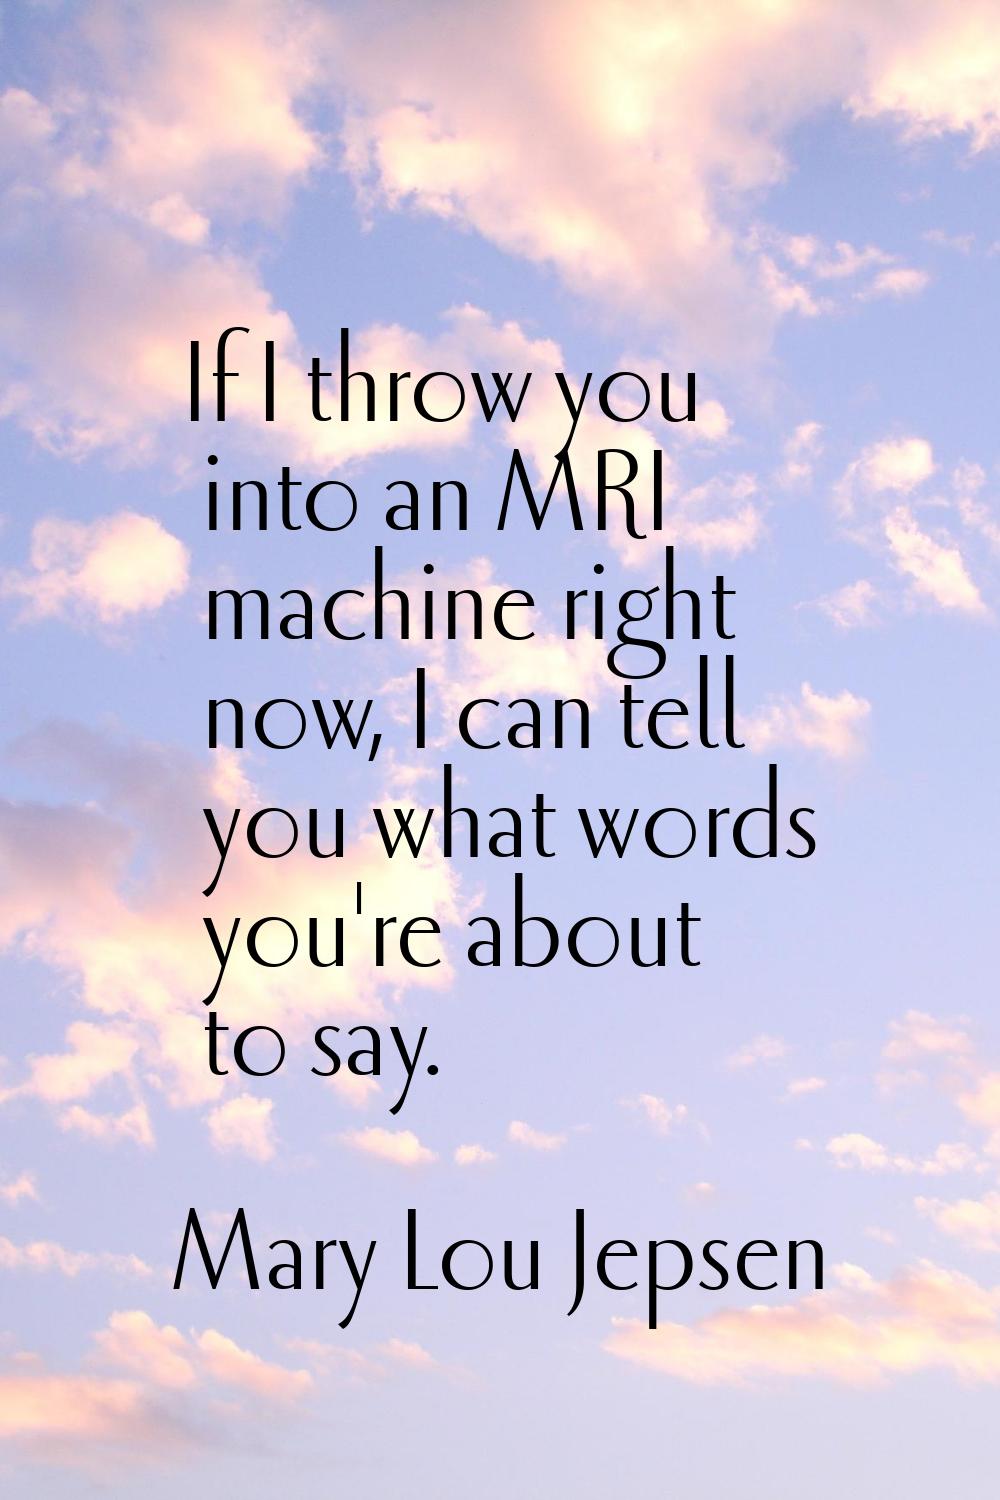 If I throw you into an MRI machine right now, I can tell you what words you're about to say.